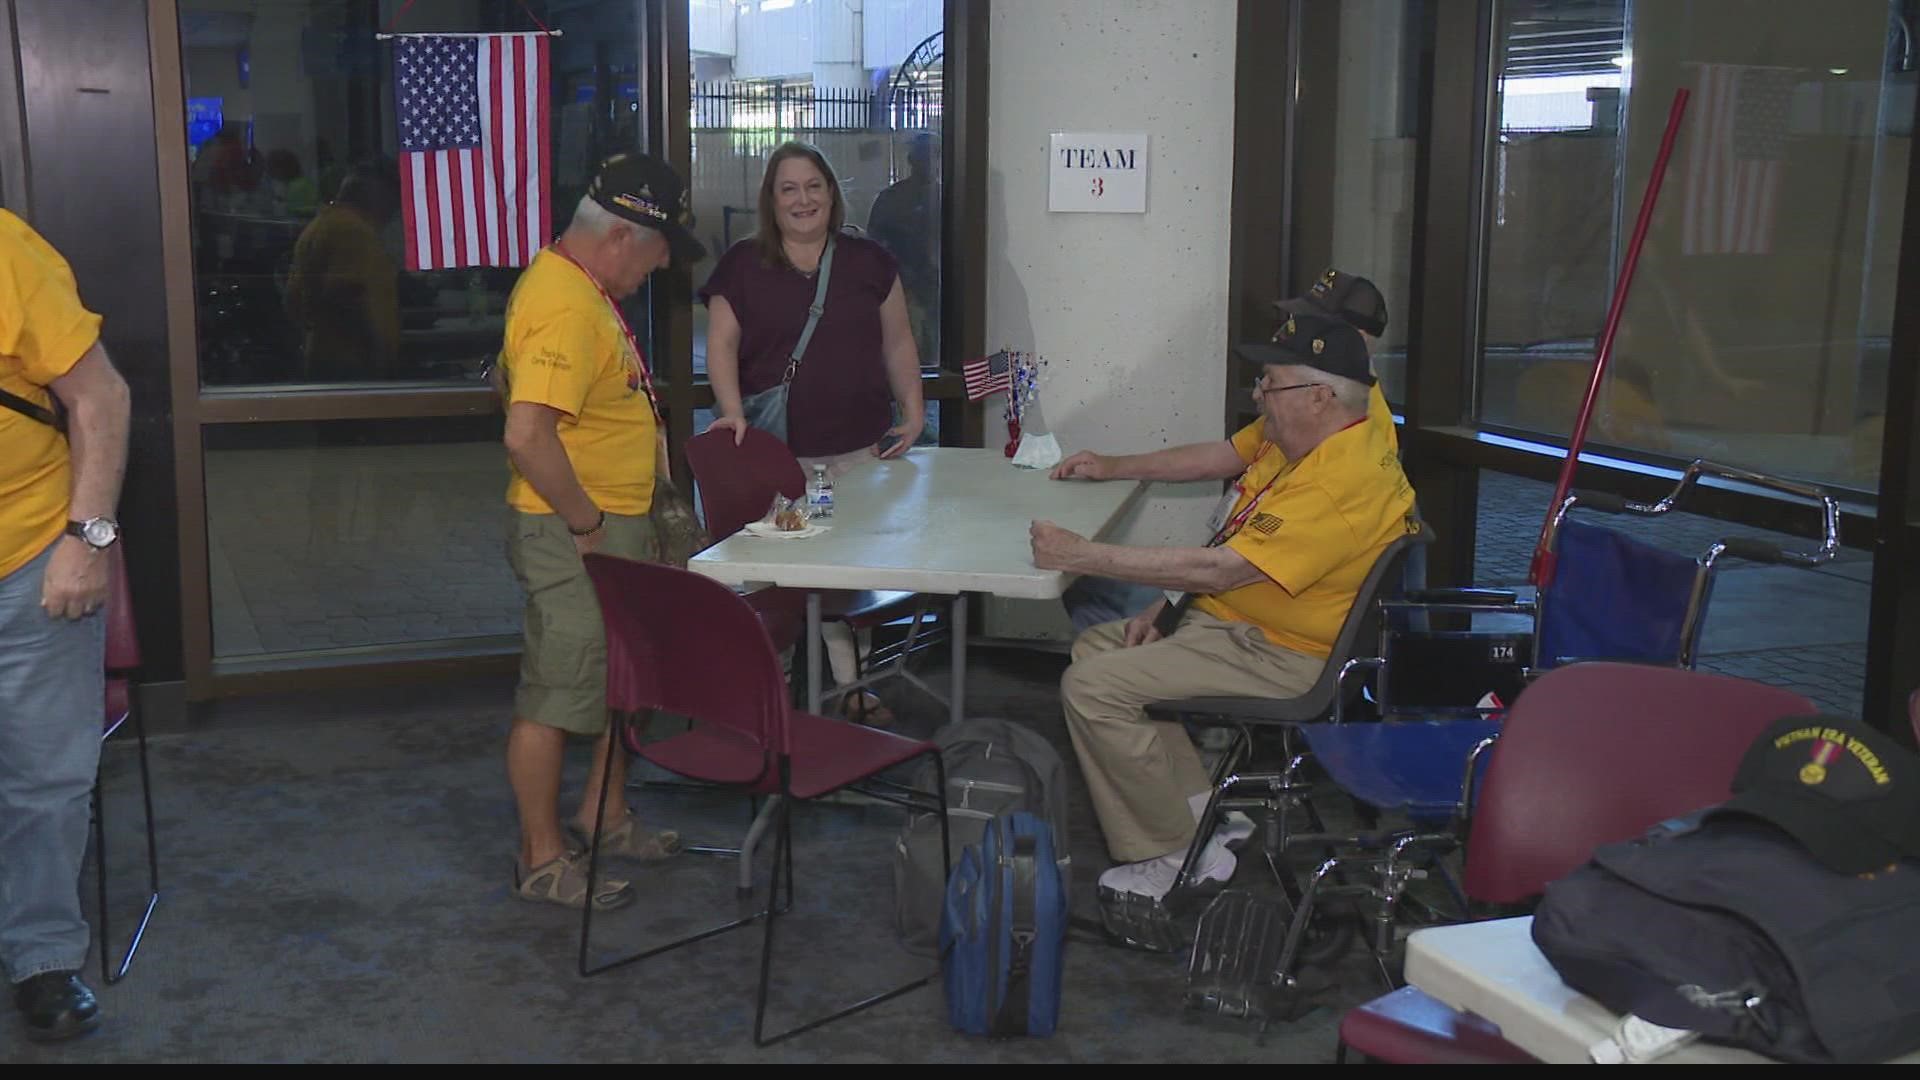 Honor Flight Arizona's final spring 2022 flight took off on Tuesday bound for Washington D.C. One veteran said it's an honor that's been a long time coming for him.